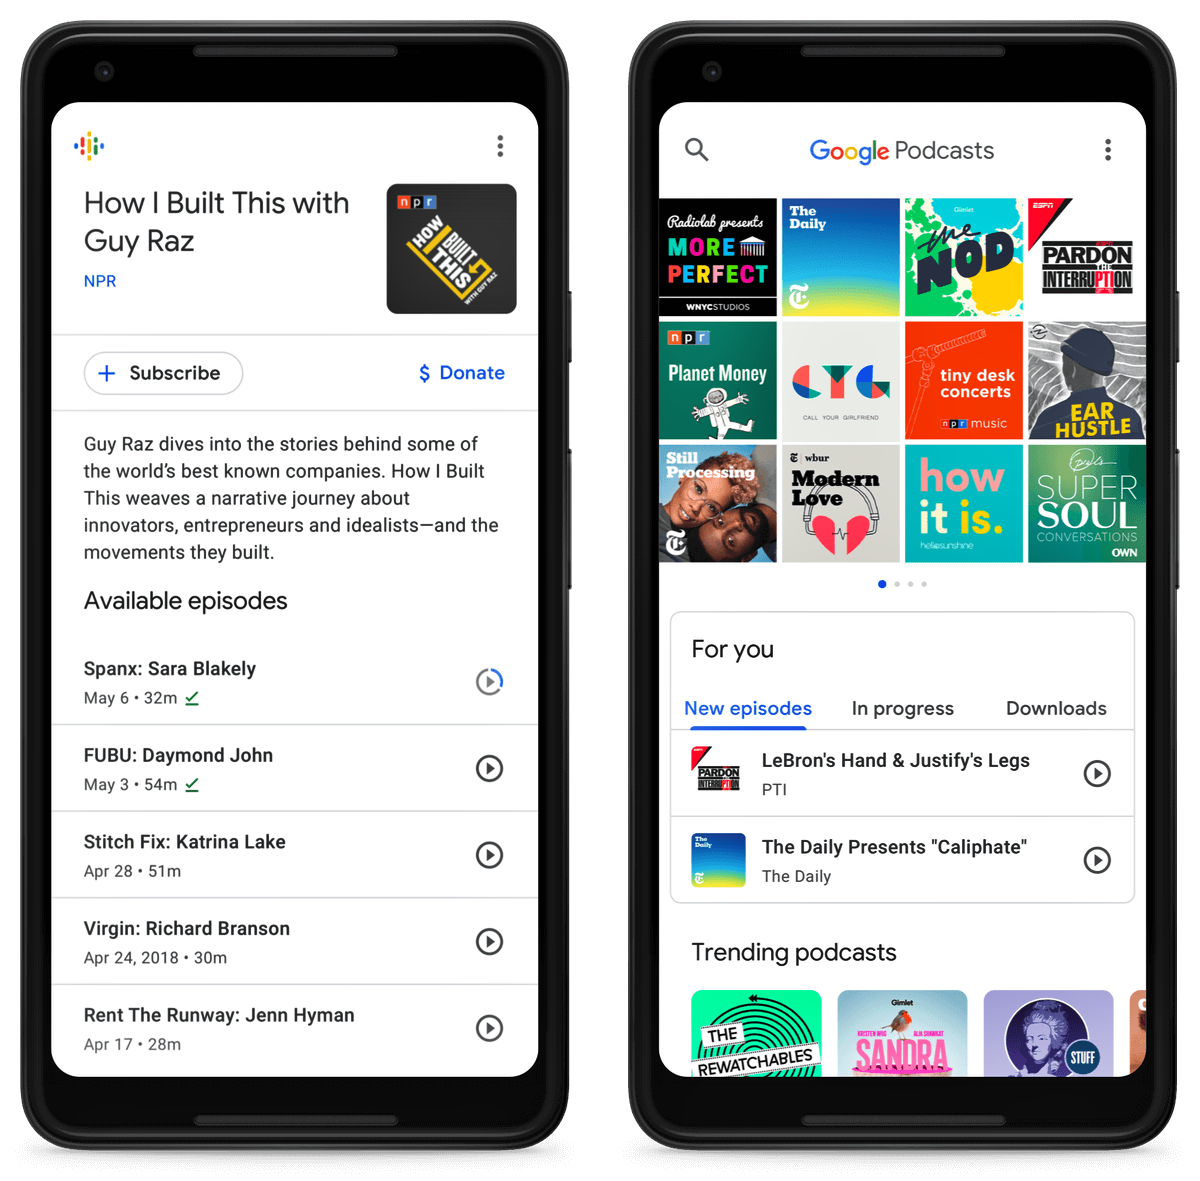 How To Listen To ITunes Podcasts On Android